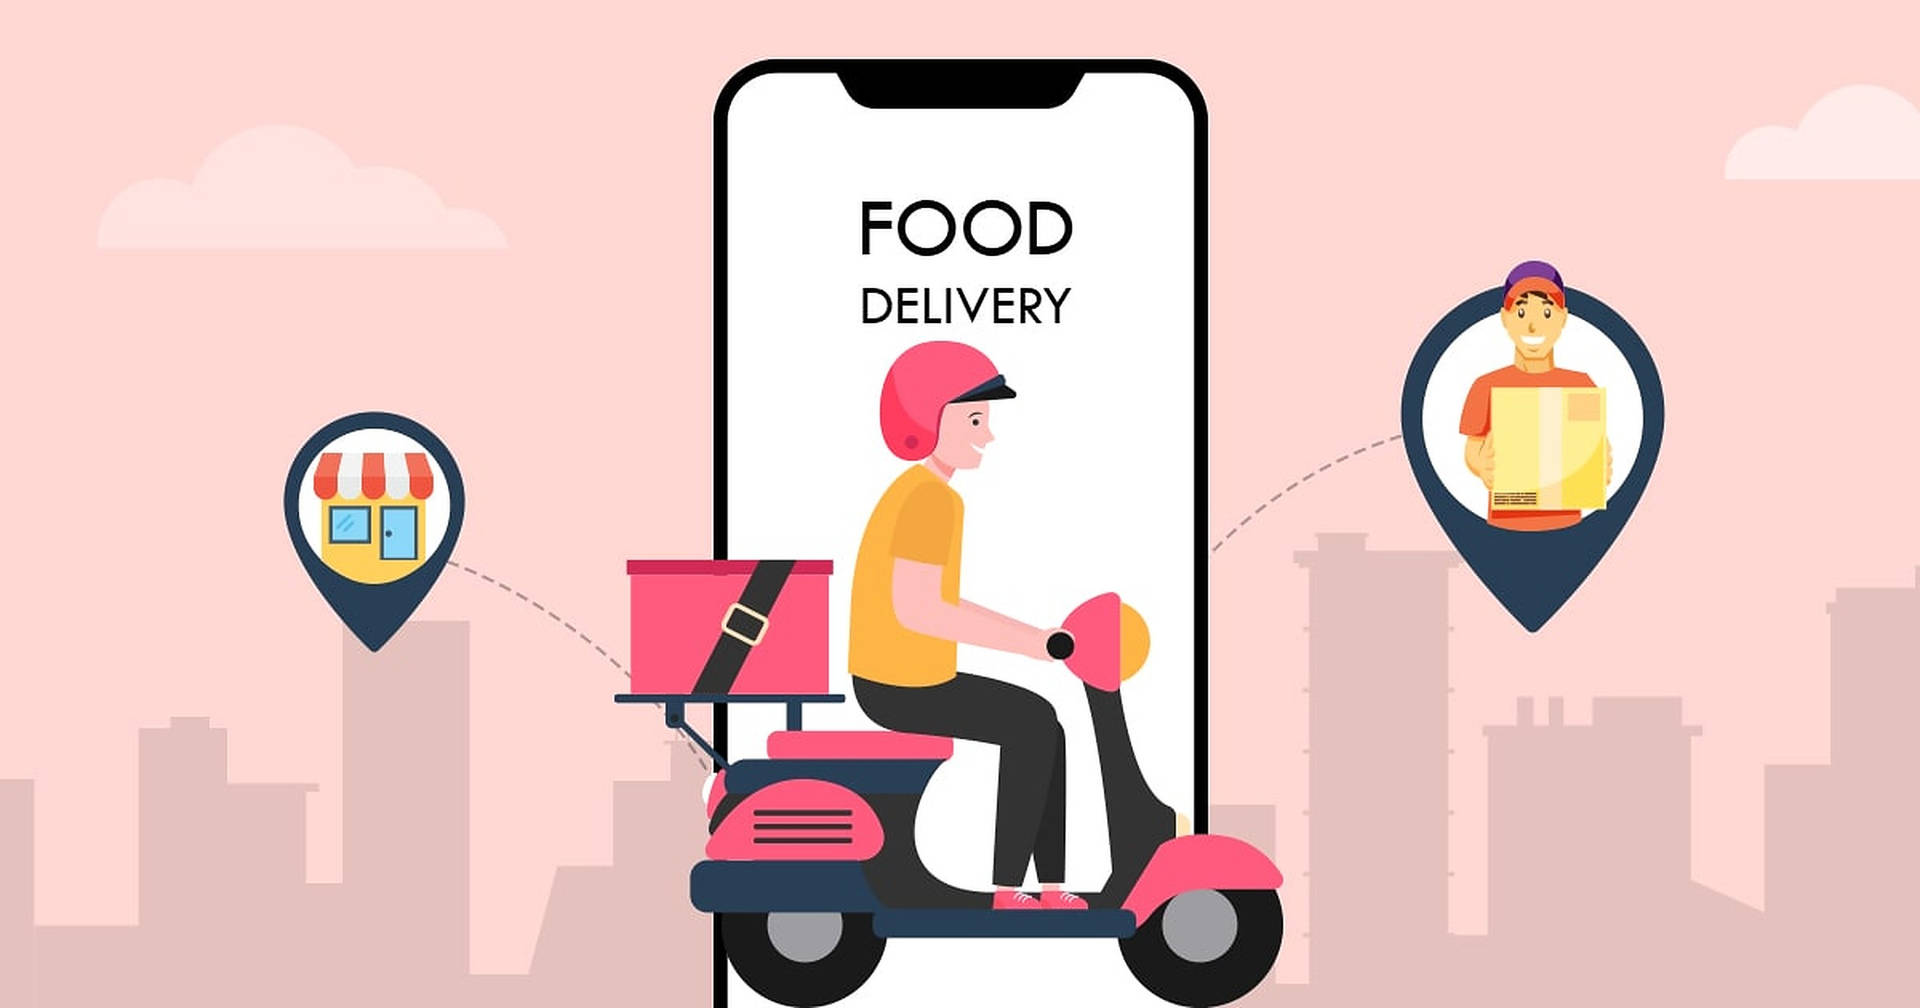 Food Delivery Background Photos